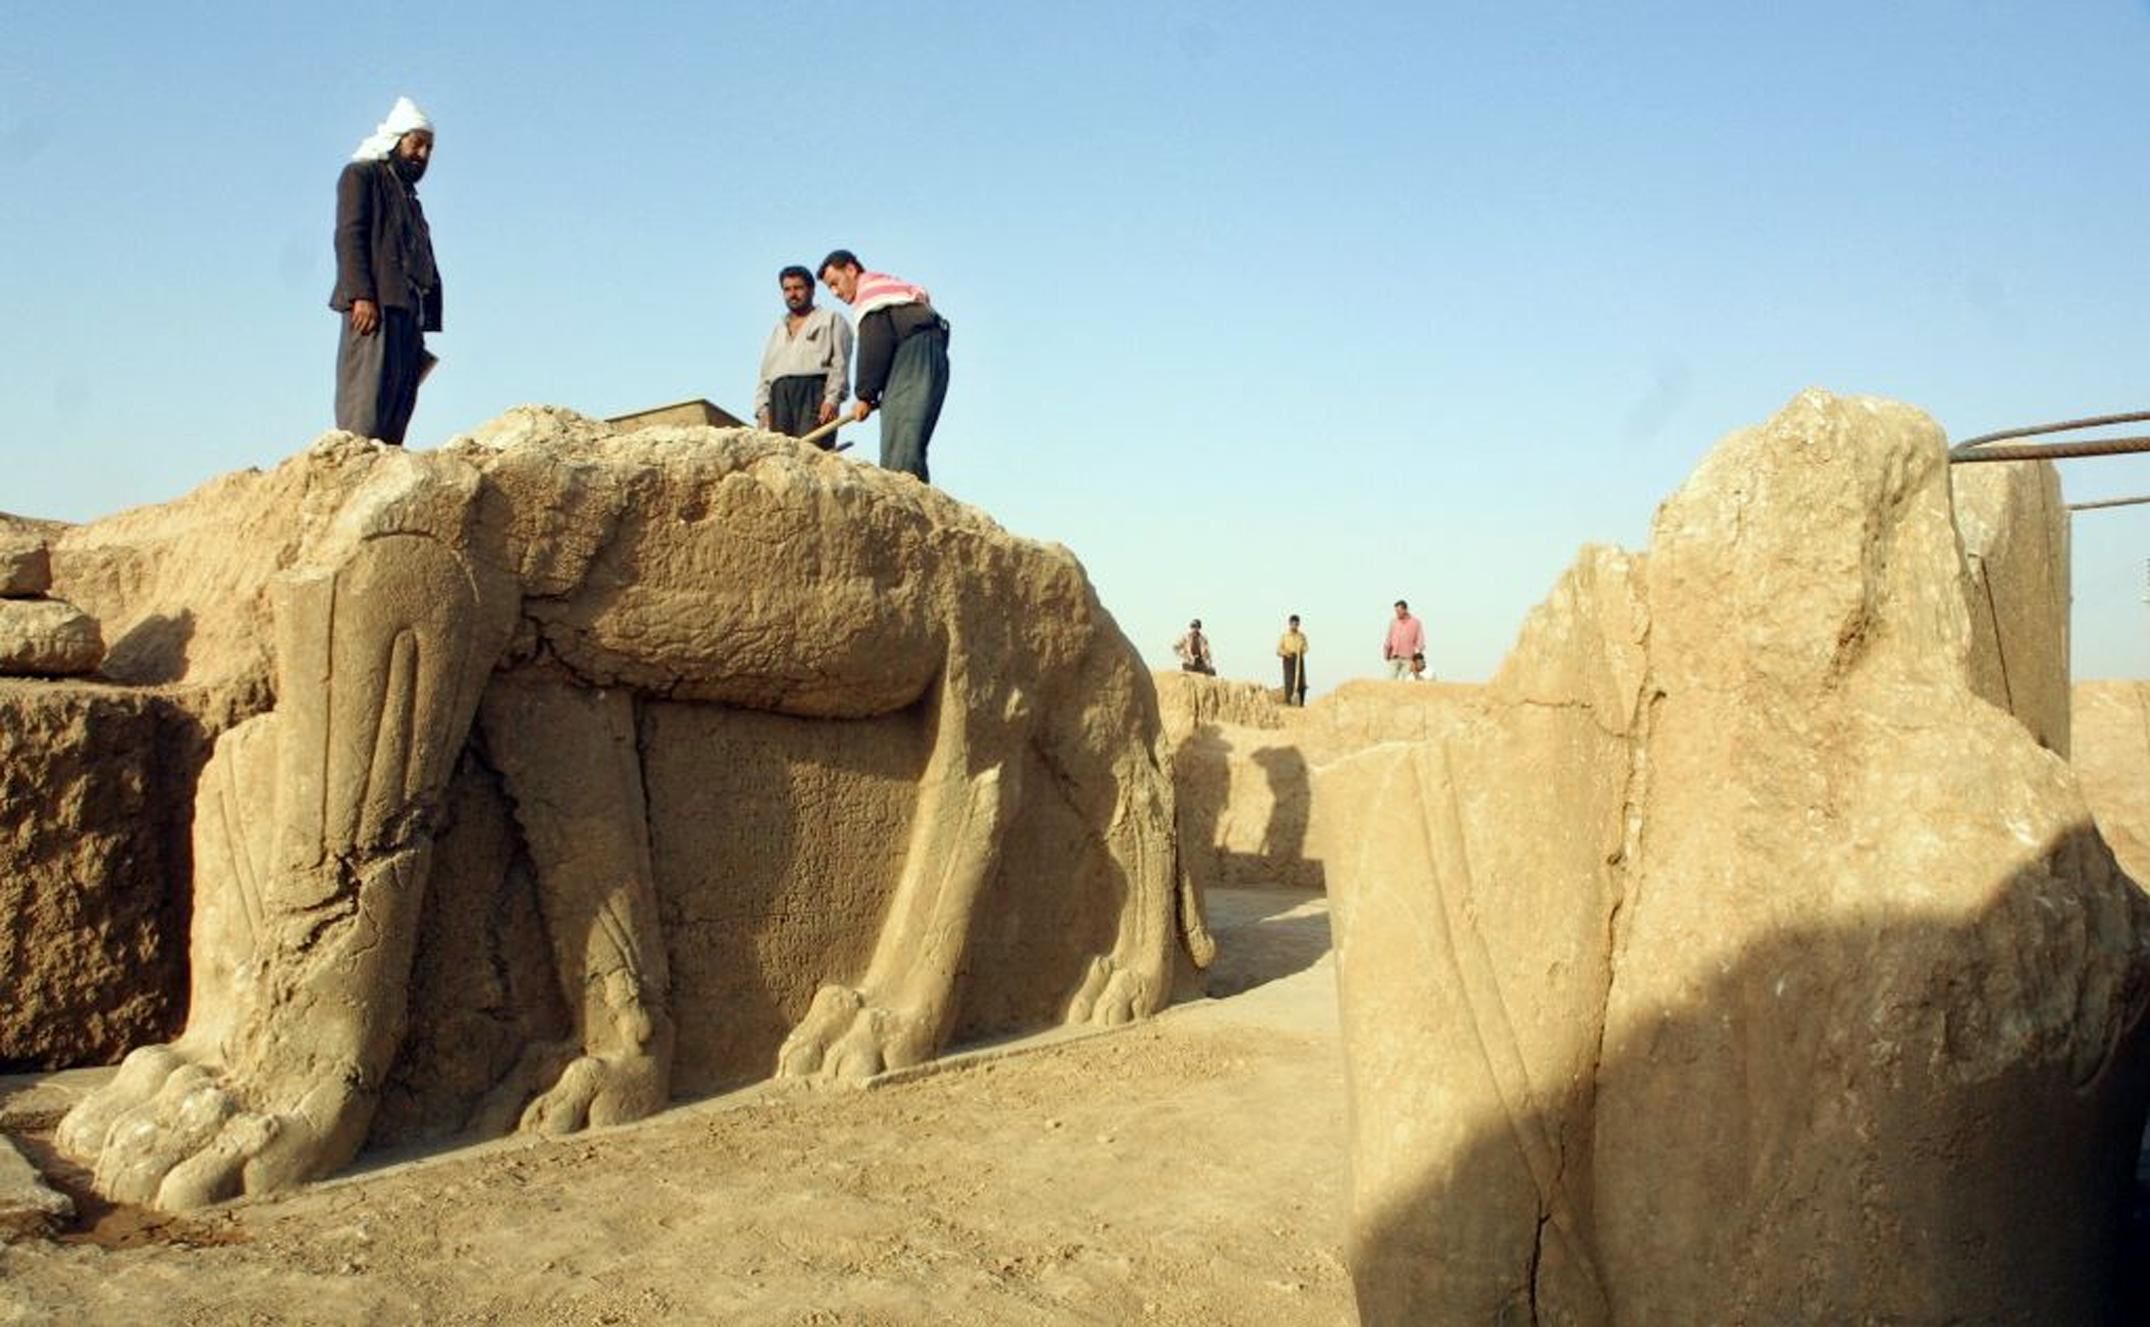 A file picture taken in 2001 shows Iraqi workers cleaning a statue of winged bull at an archeological site in Nimrud, 35 km southeast of the northern city of Mosul. The Islamic State group has begun bulldozing the ancient Assyrian city of Nimrud in the jihadis' latest attack on the country's historical heritage. Iraq is urging U.S.-led airstrikes to save the artifacts. | AFP-JIJI